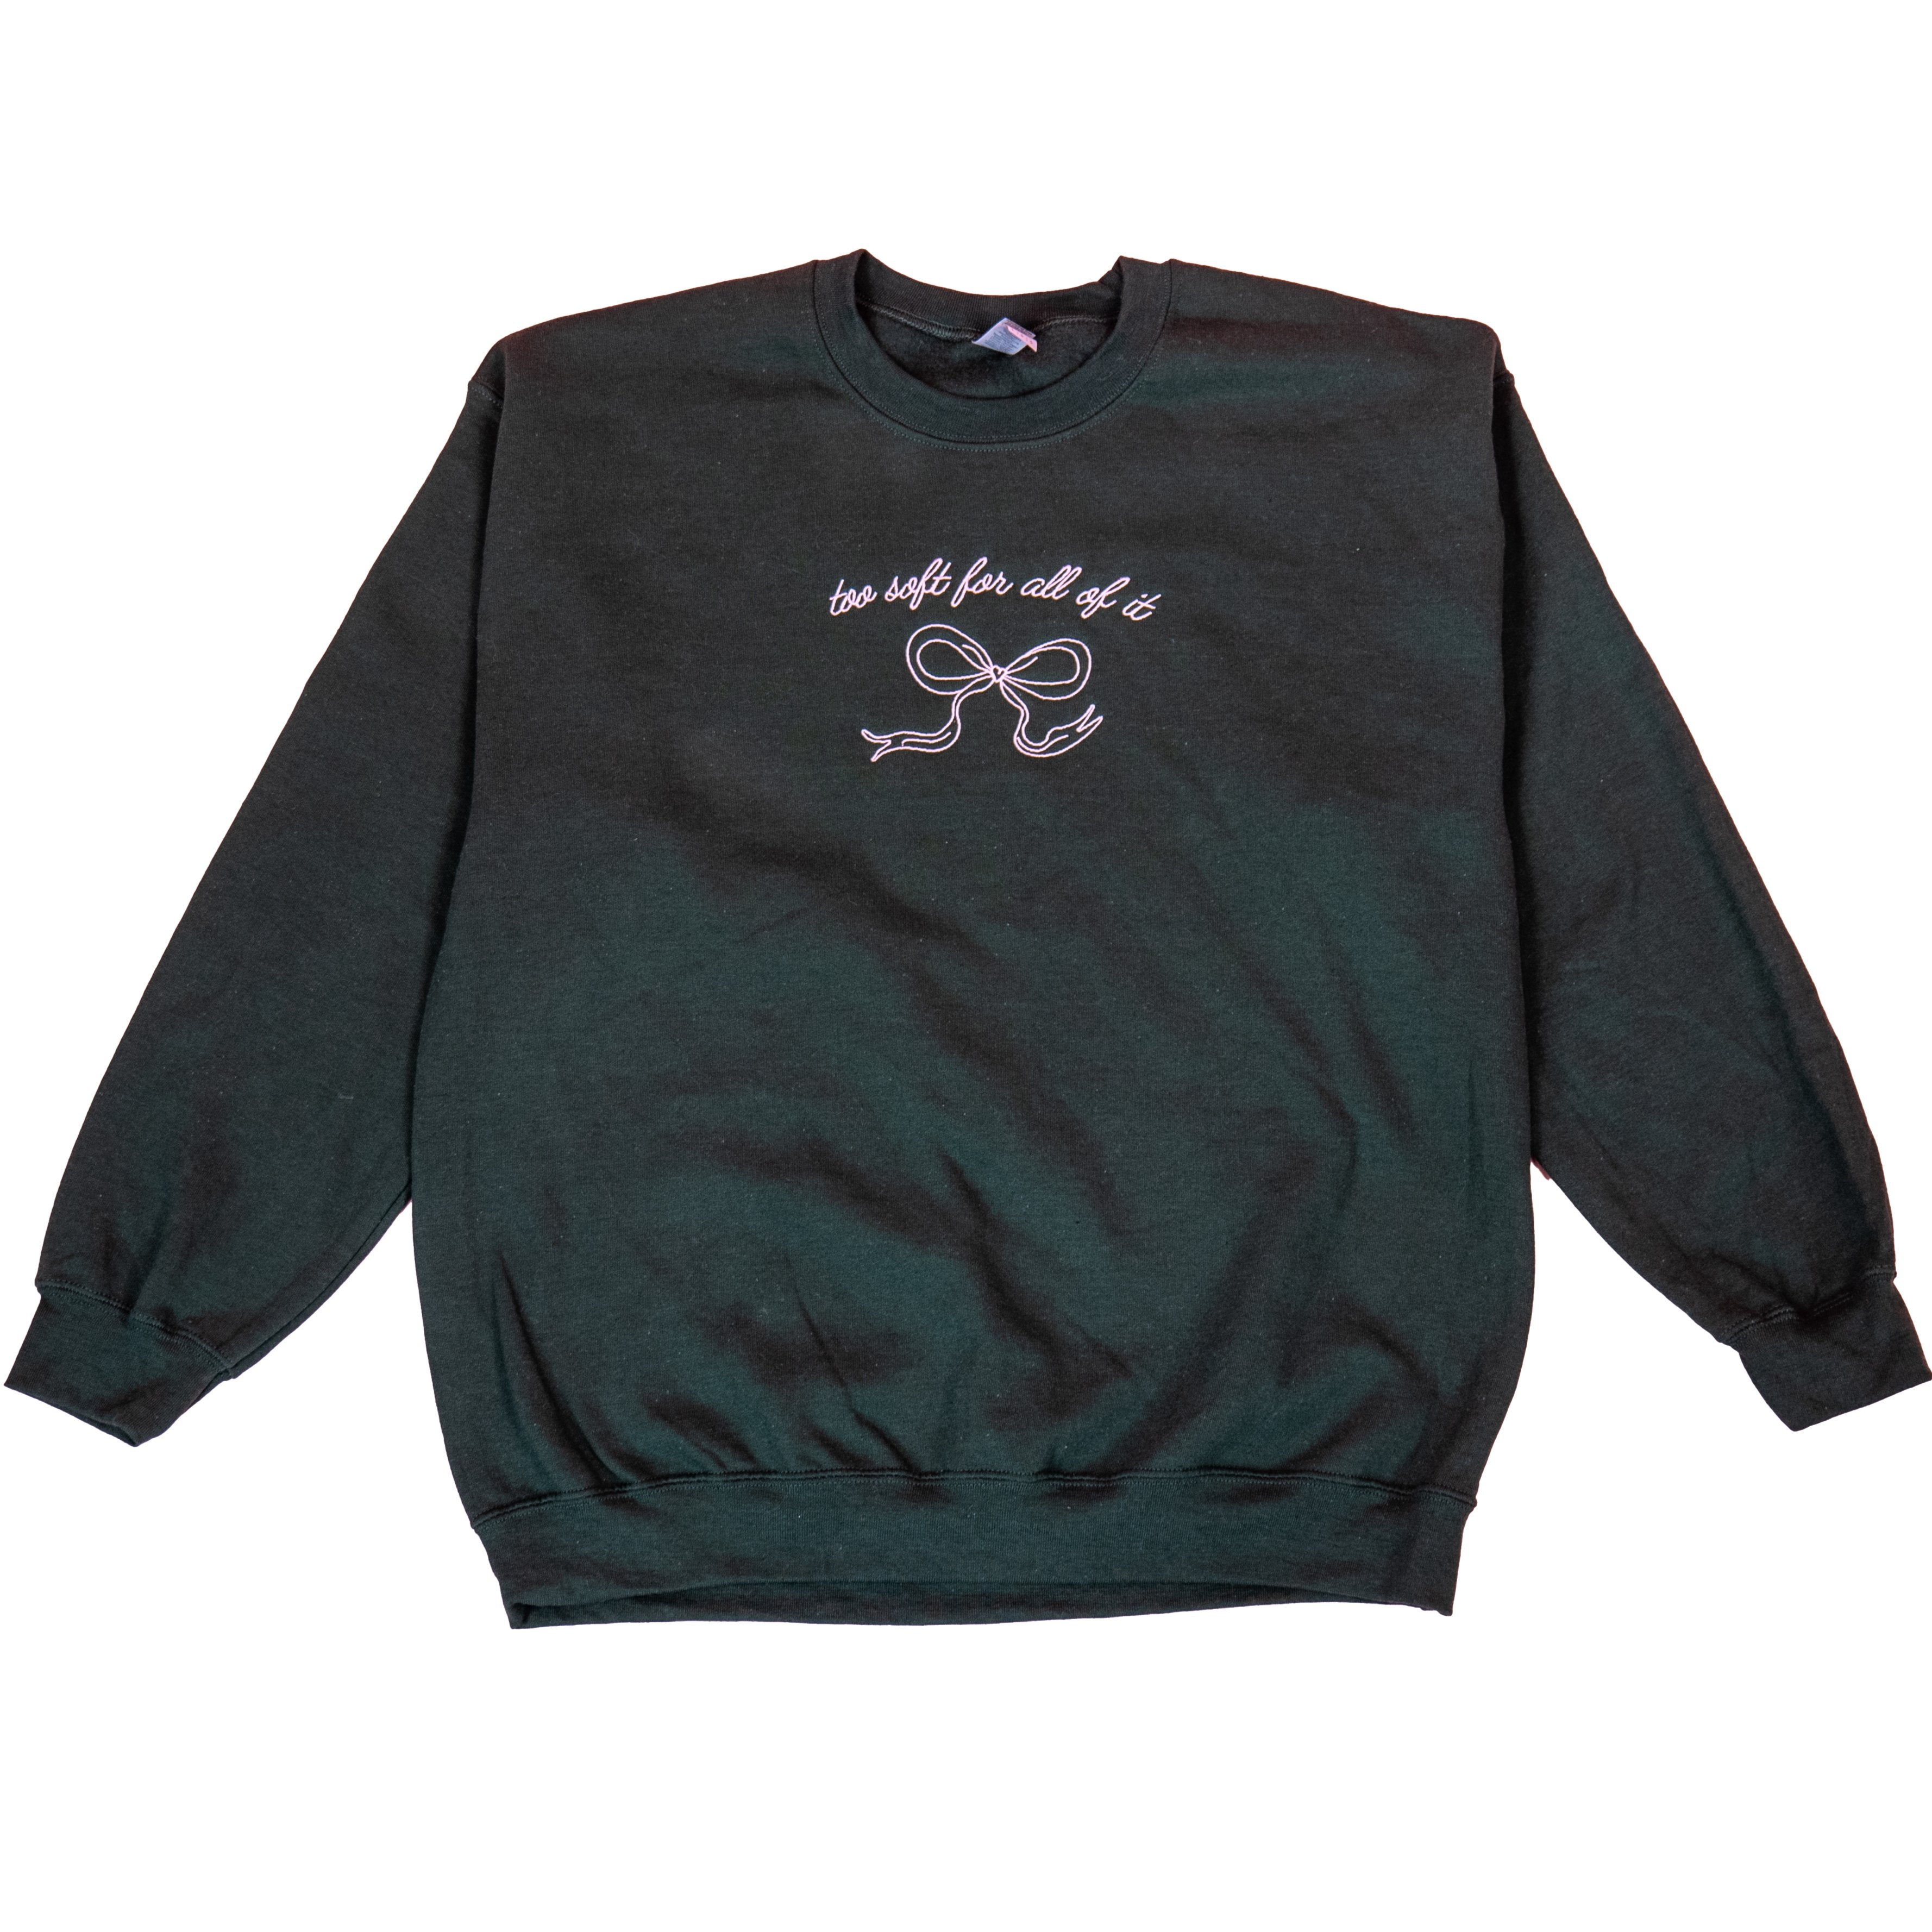 Too Soft For All Of It Sweatshirt - Emacity Threads